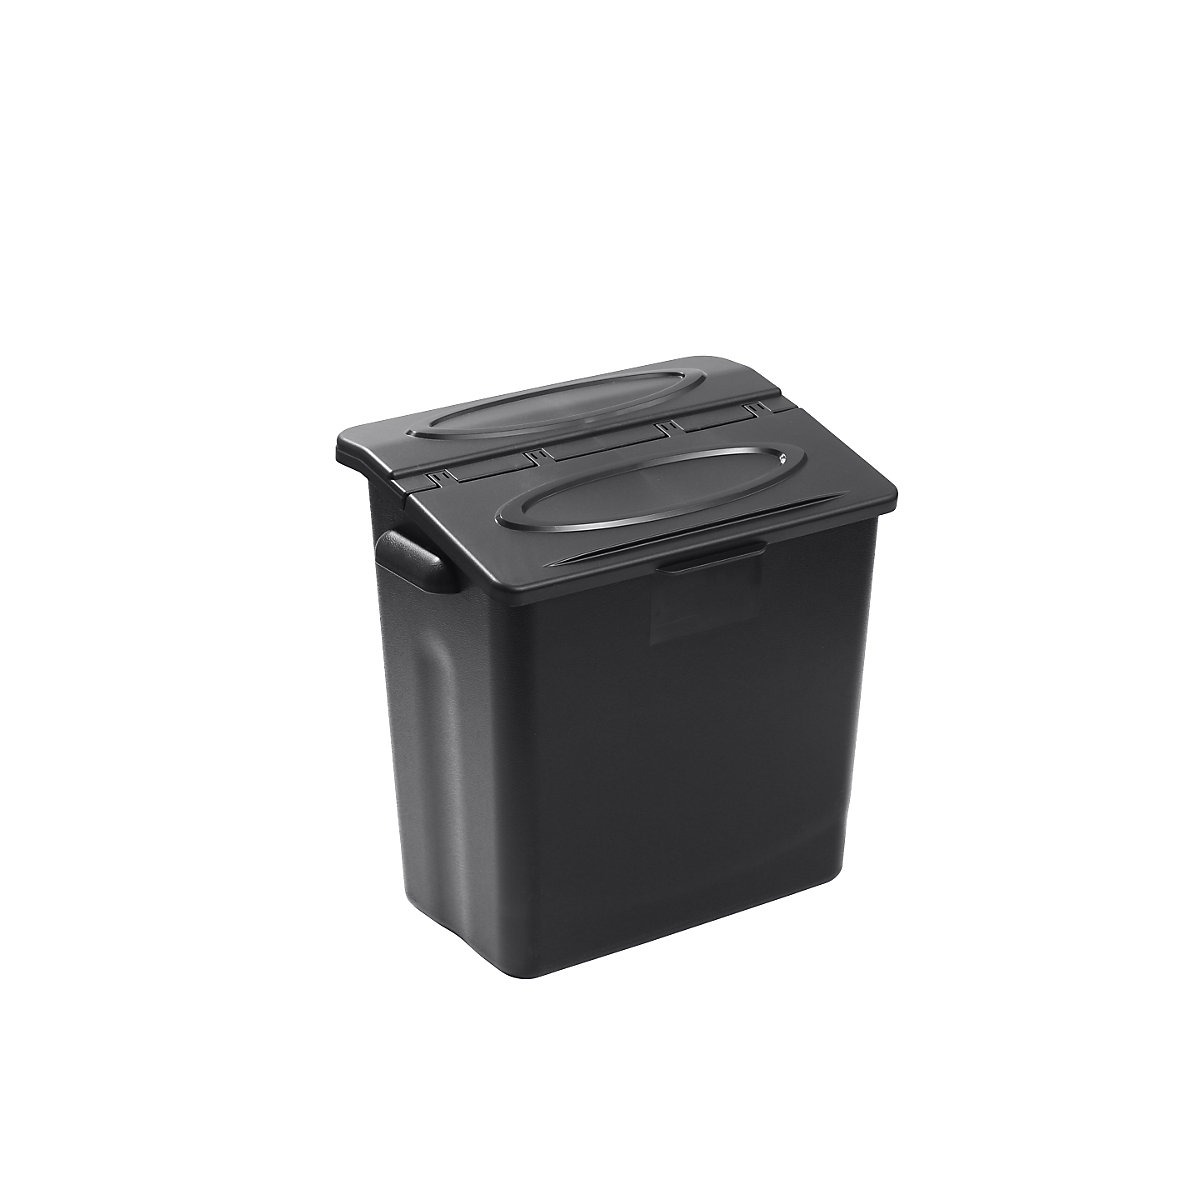 Waste bin with removable lid